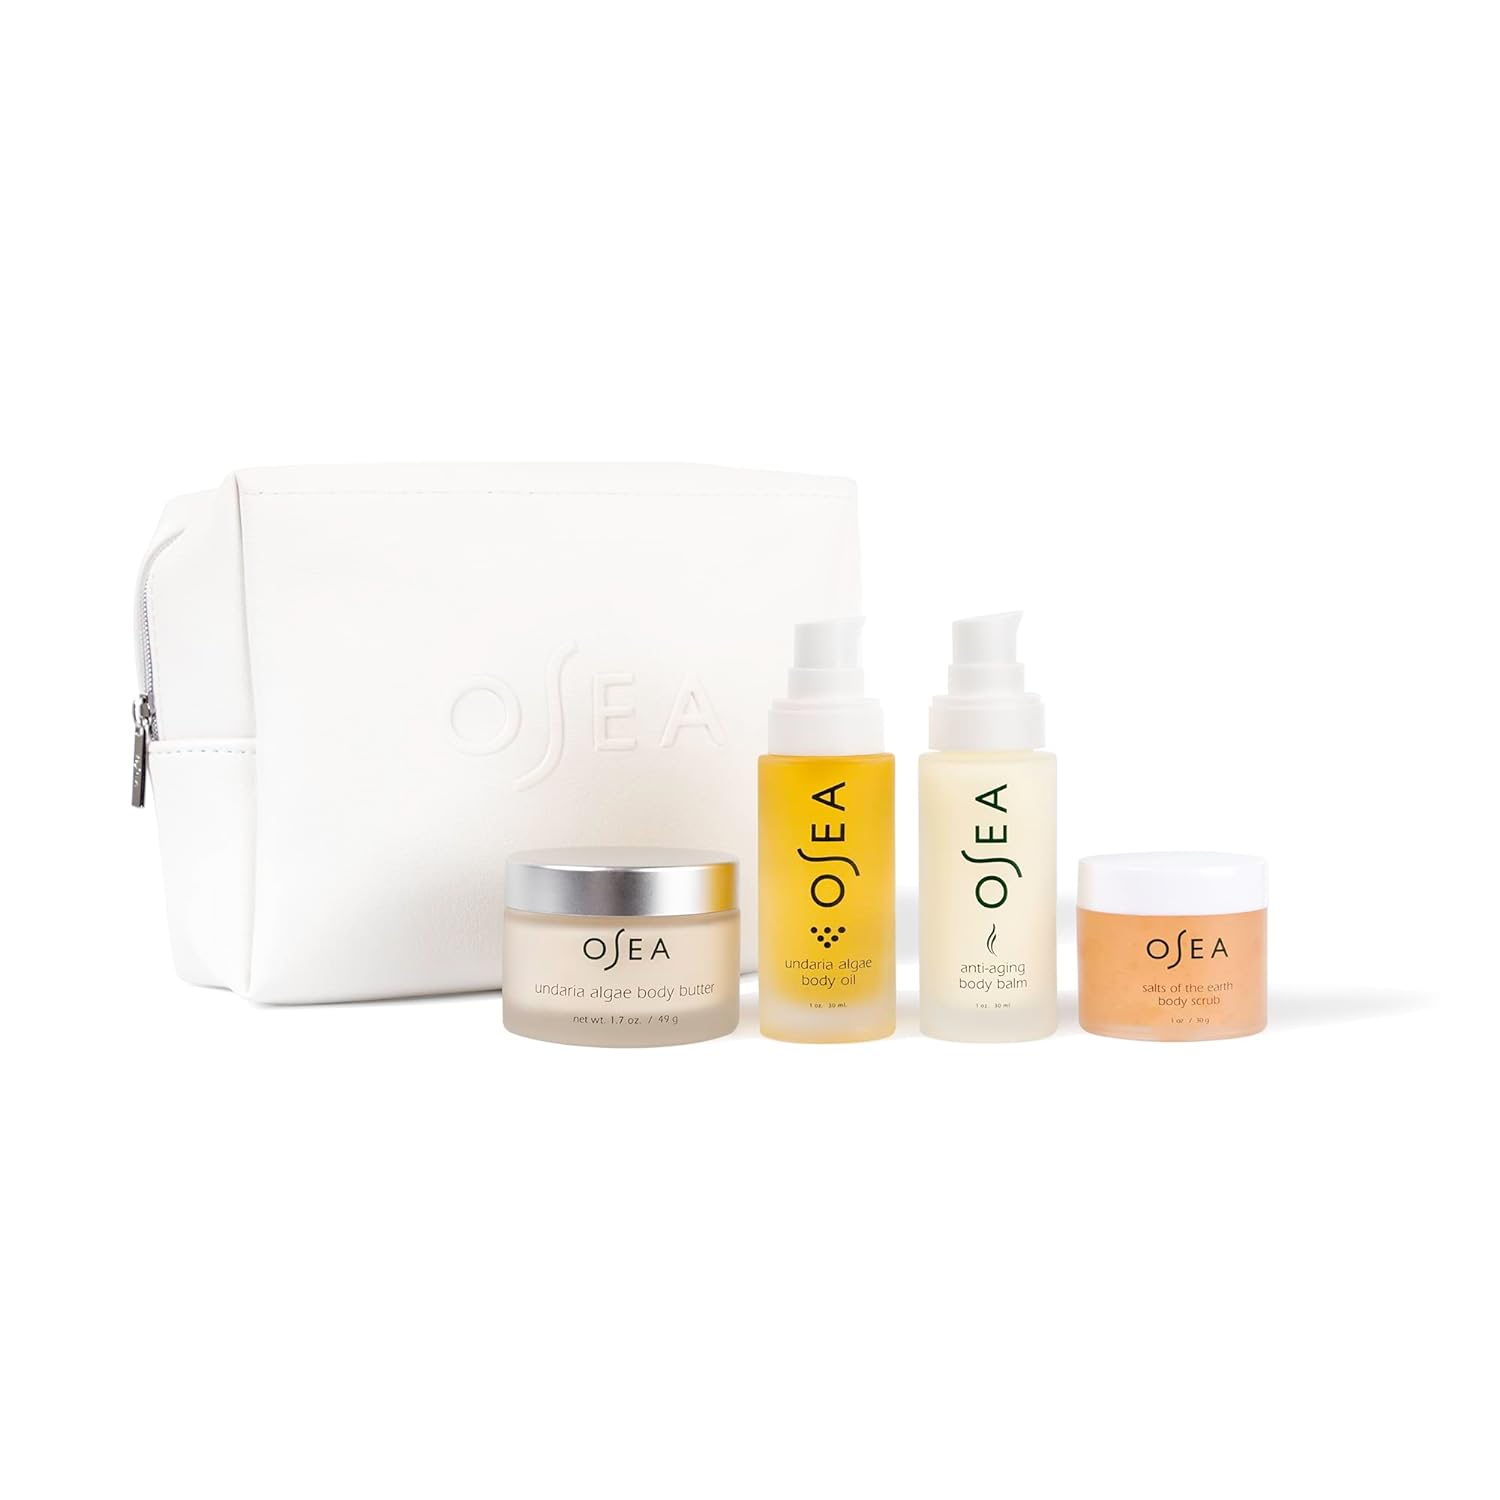 OSEA Bestsellers Bodycare Set - Pamper with a 4-piece Skincare Kit - Body Oil, Scrub, Balm, Butter - Vegan  Cruelty-Free Clean Beauty - Ideal for Beauty Gifts